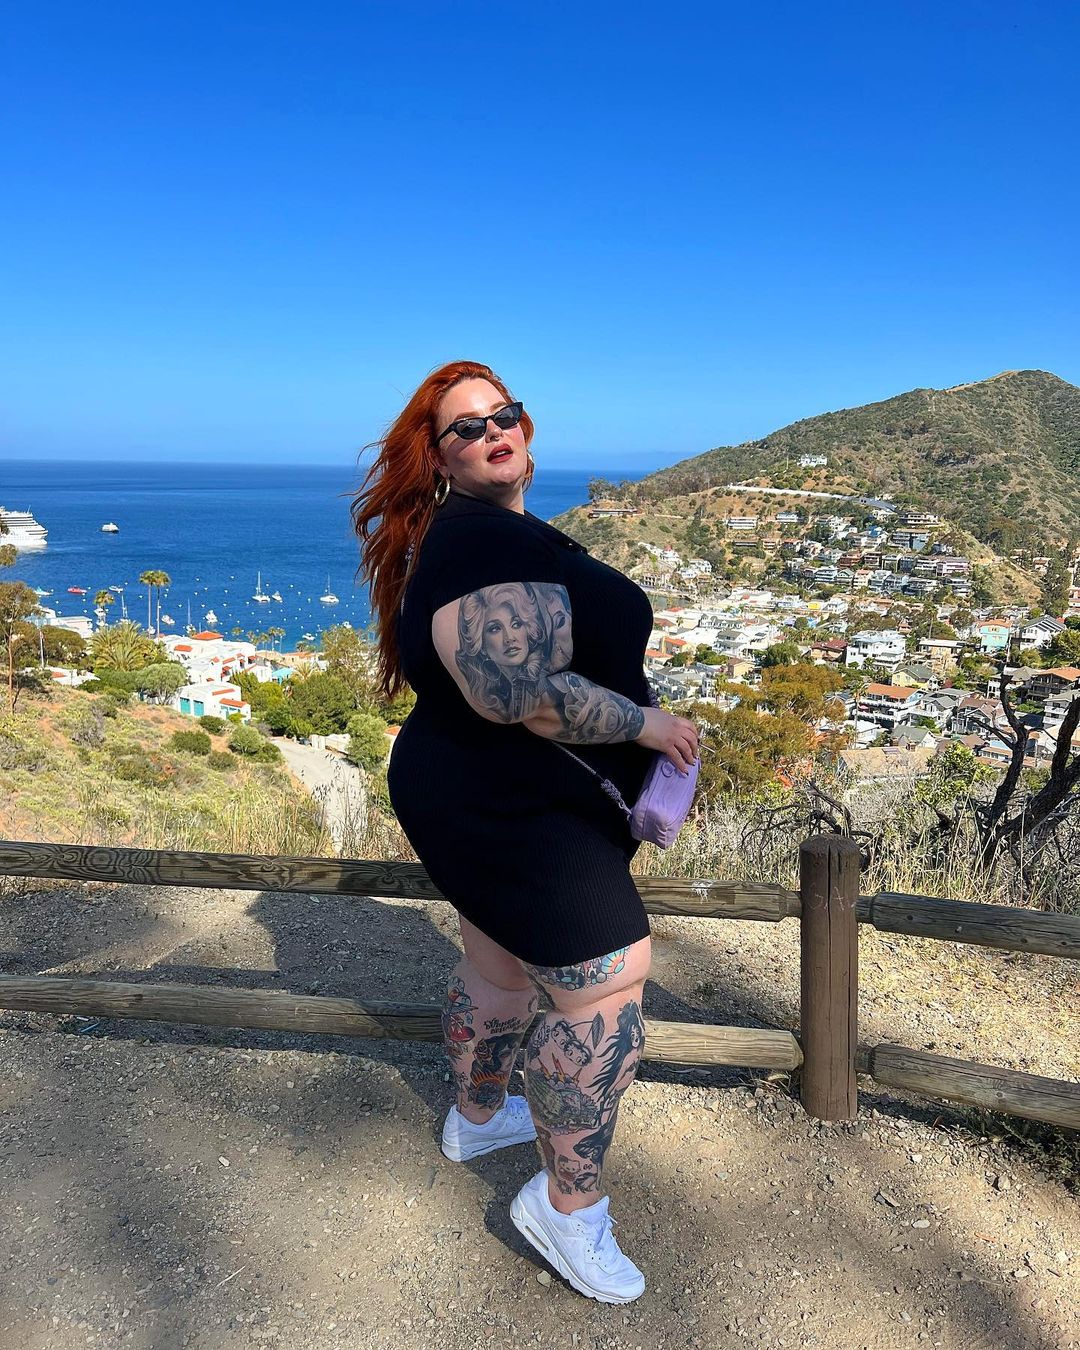 Model Tess Holliday 'really struggling' with body image